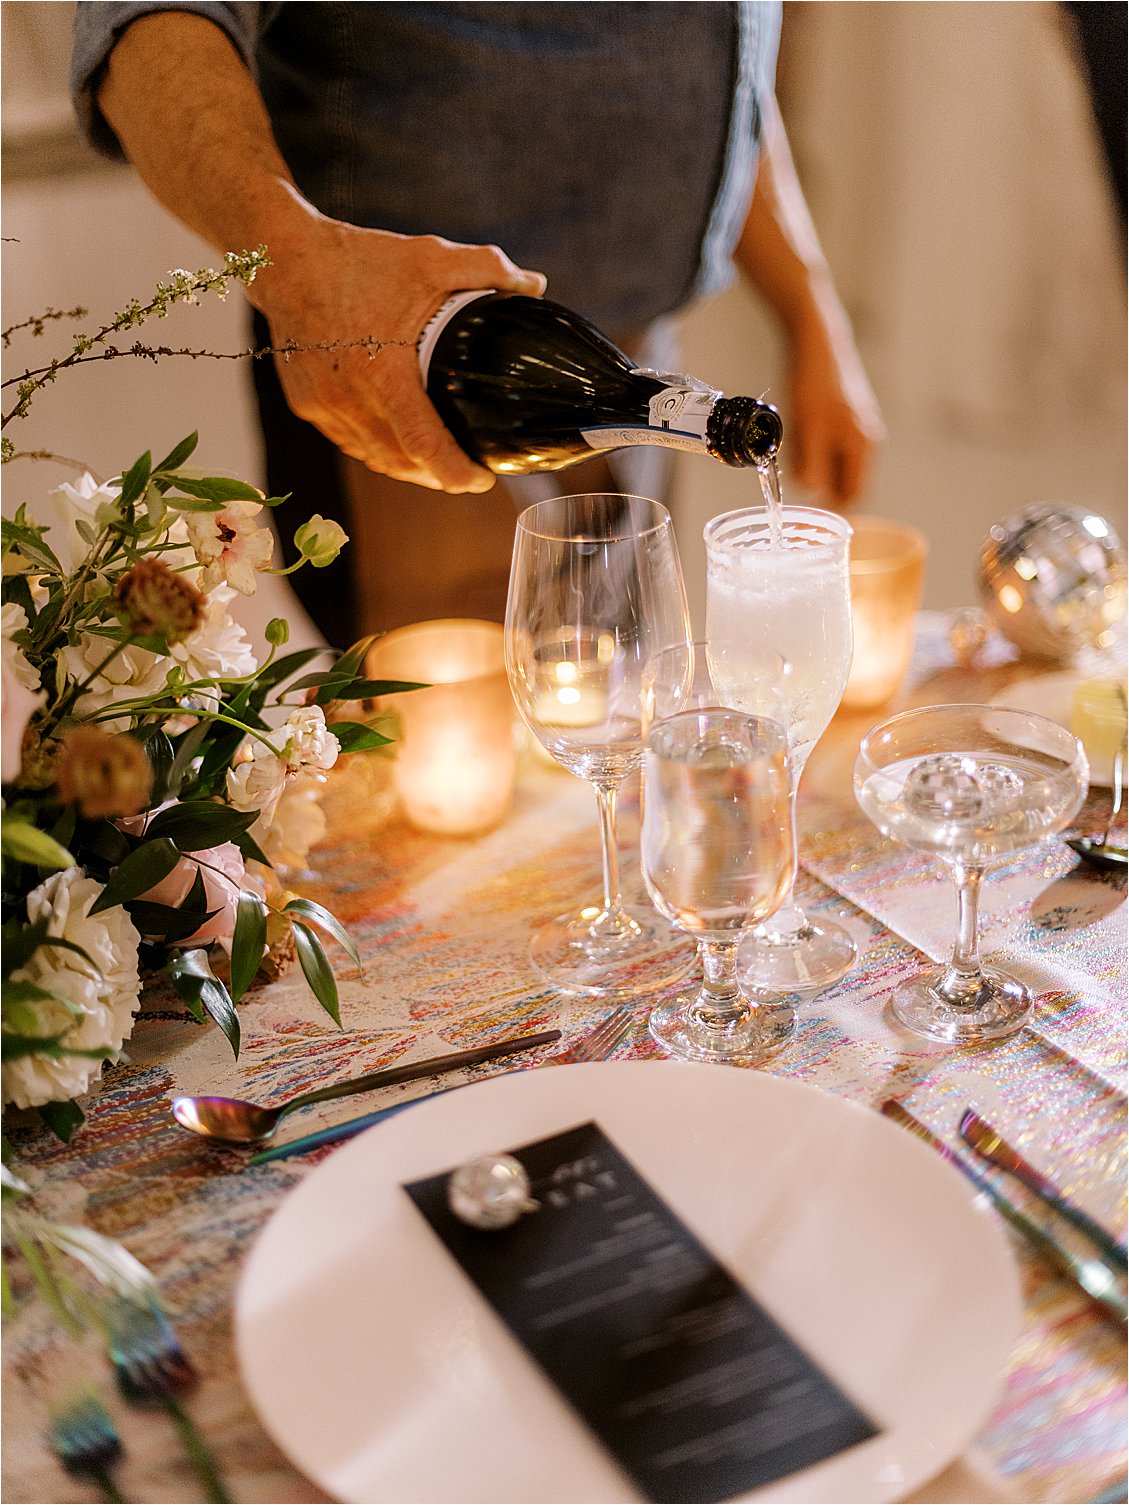 Champagne being poured during wedding reception in Washington DC with film wedding photographer Renee Hollingshead